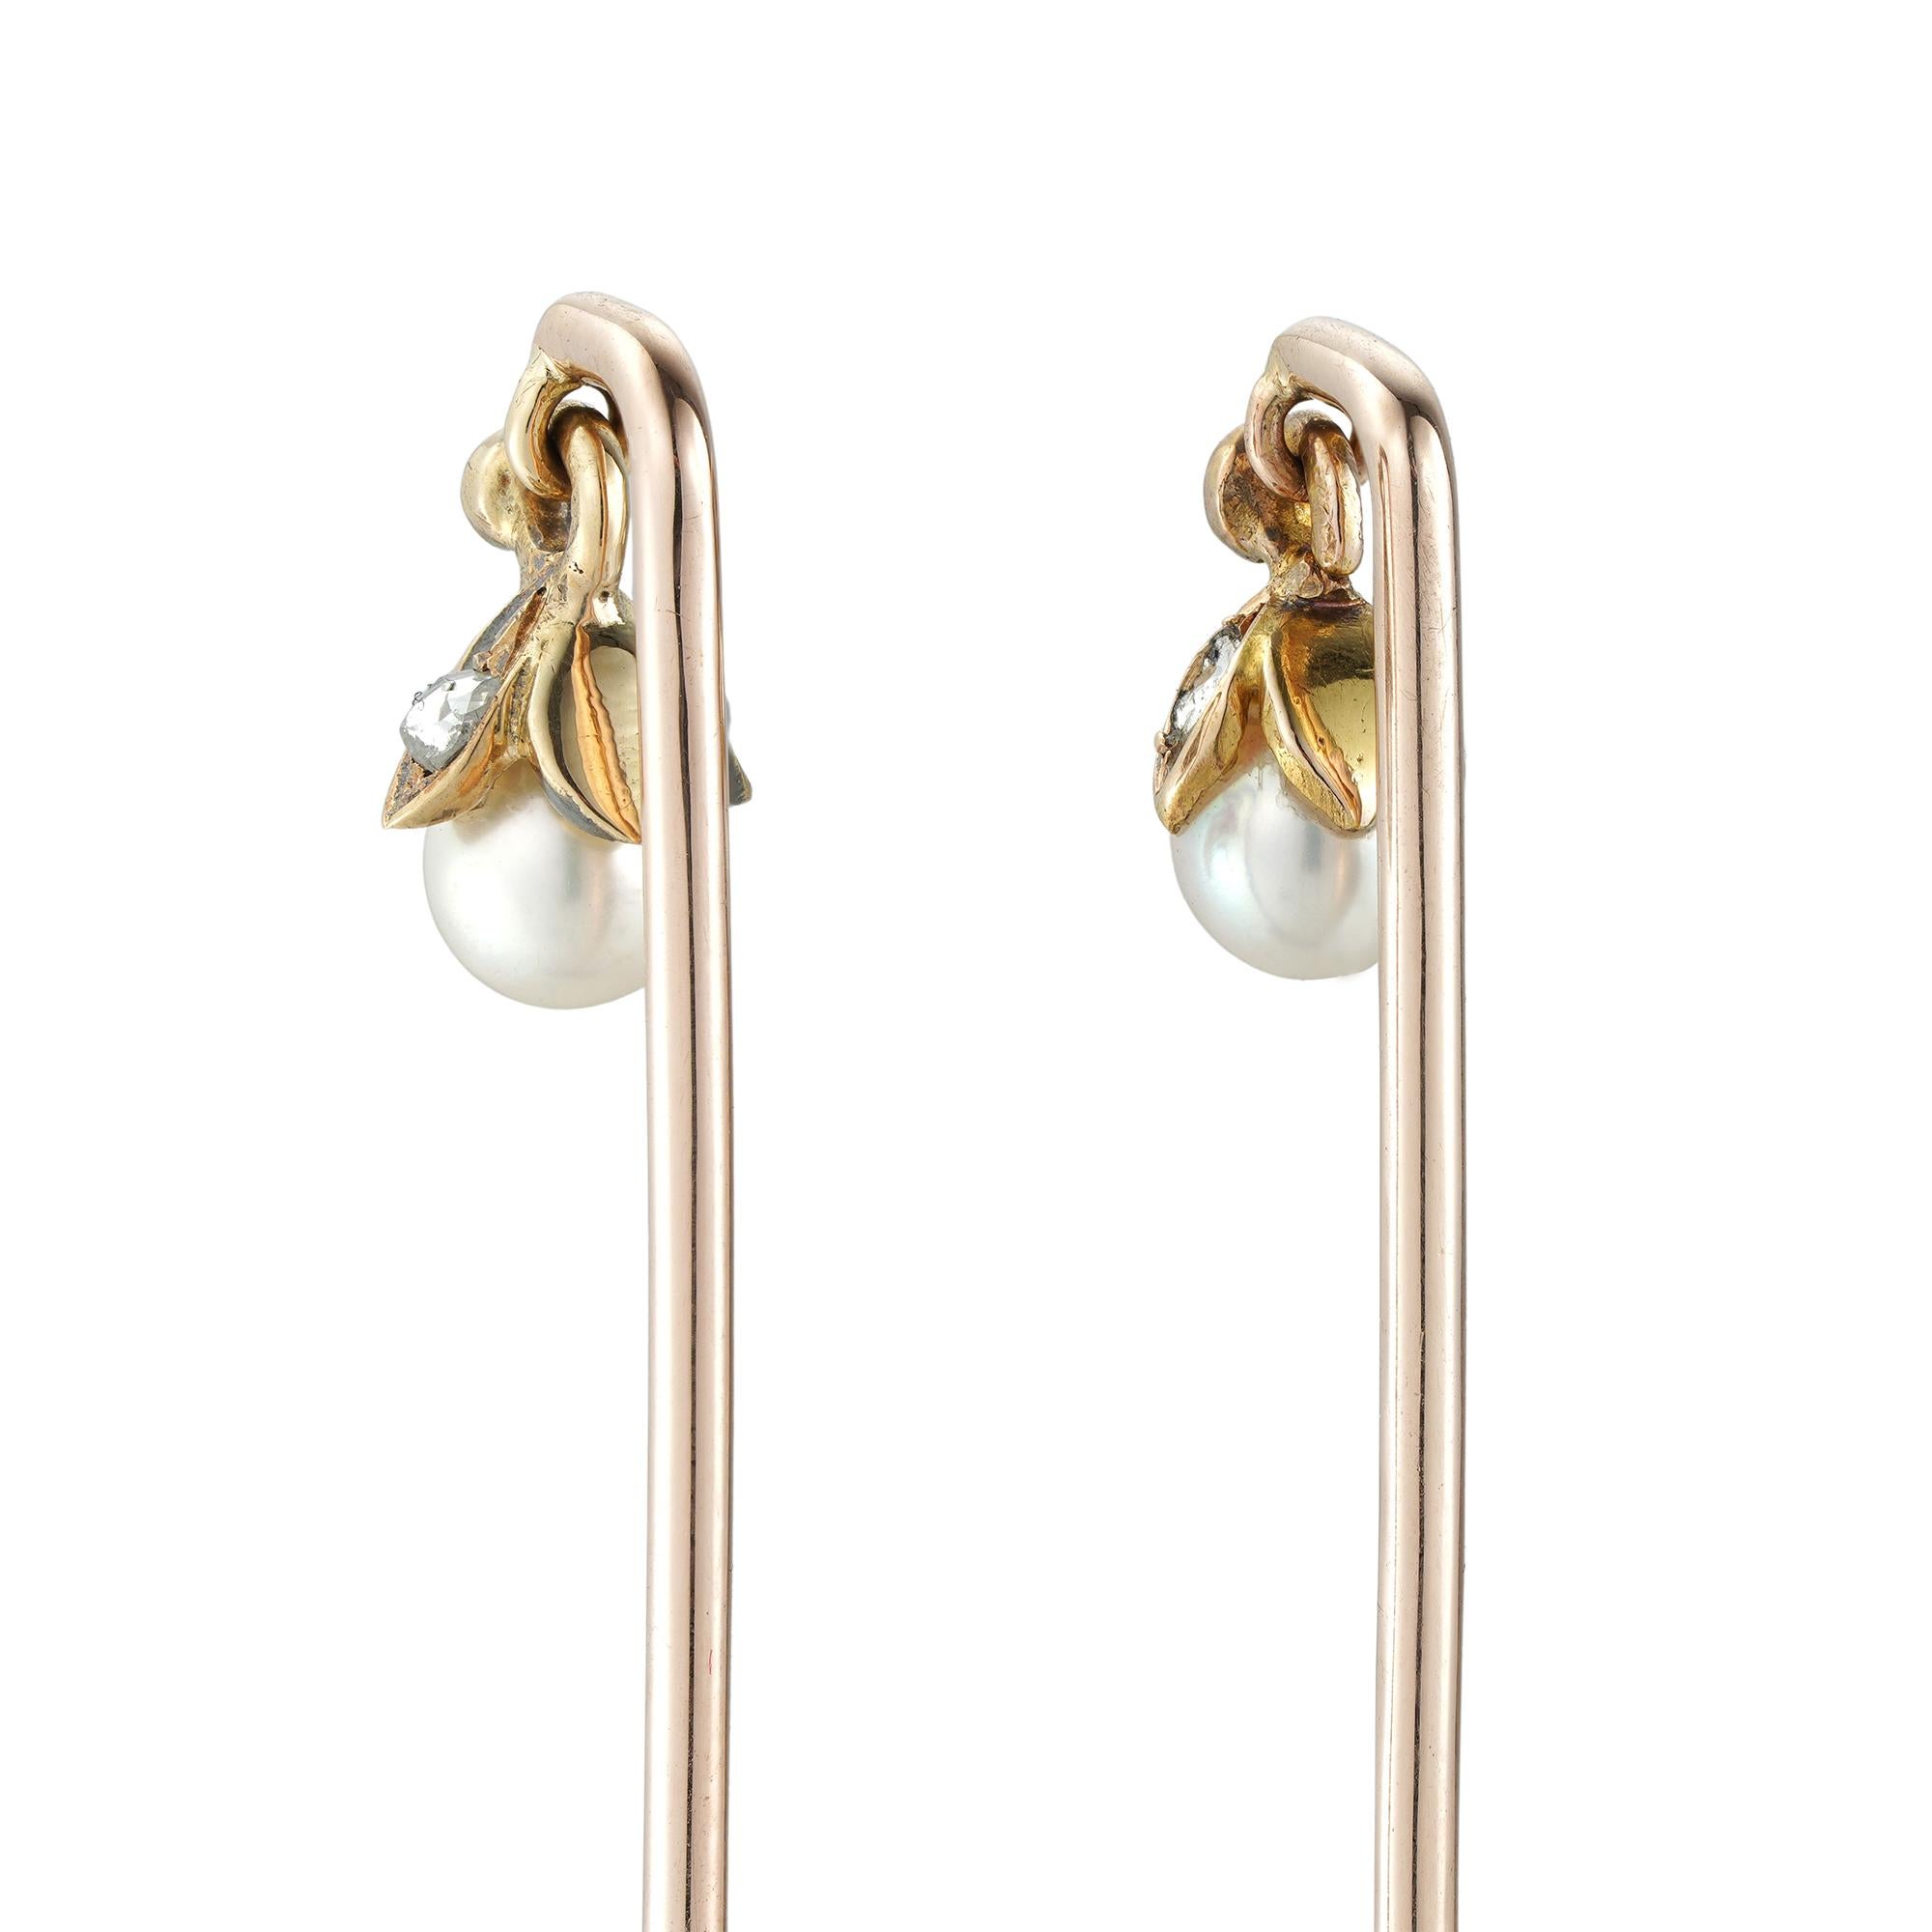 A pair of pearl and diamond stick pins, each pearl set on a rose-cut diamond-set cap, suspended by a diamond-set loop, all set in yellow gold, circa 1890, the jewelled parts measuring 1 x 0.7cm each, the pins measuring 7cm long,  gross weight 4.3